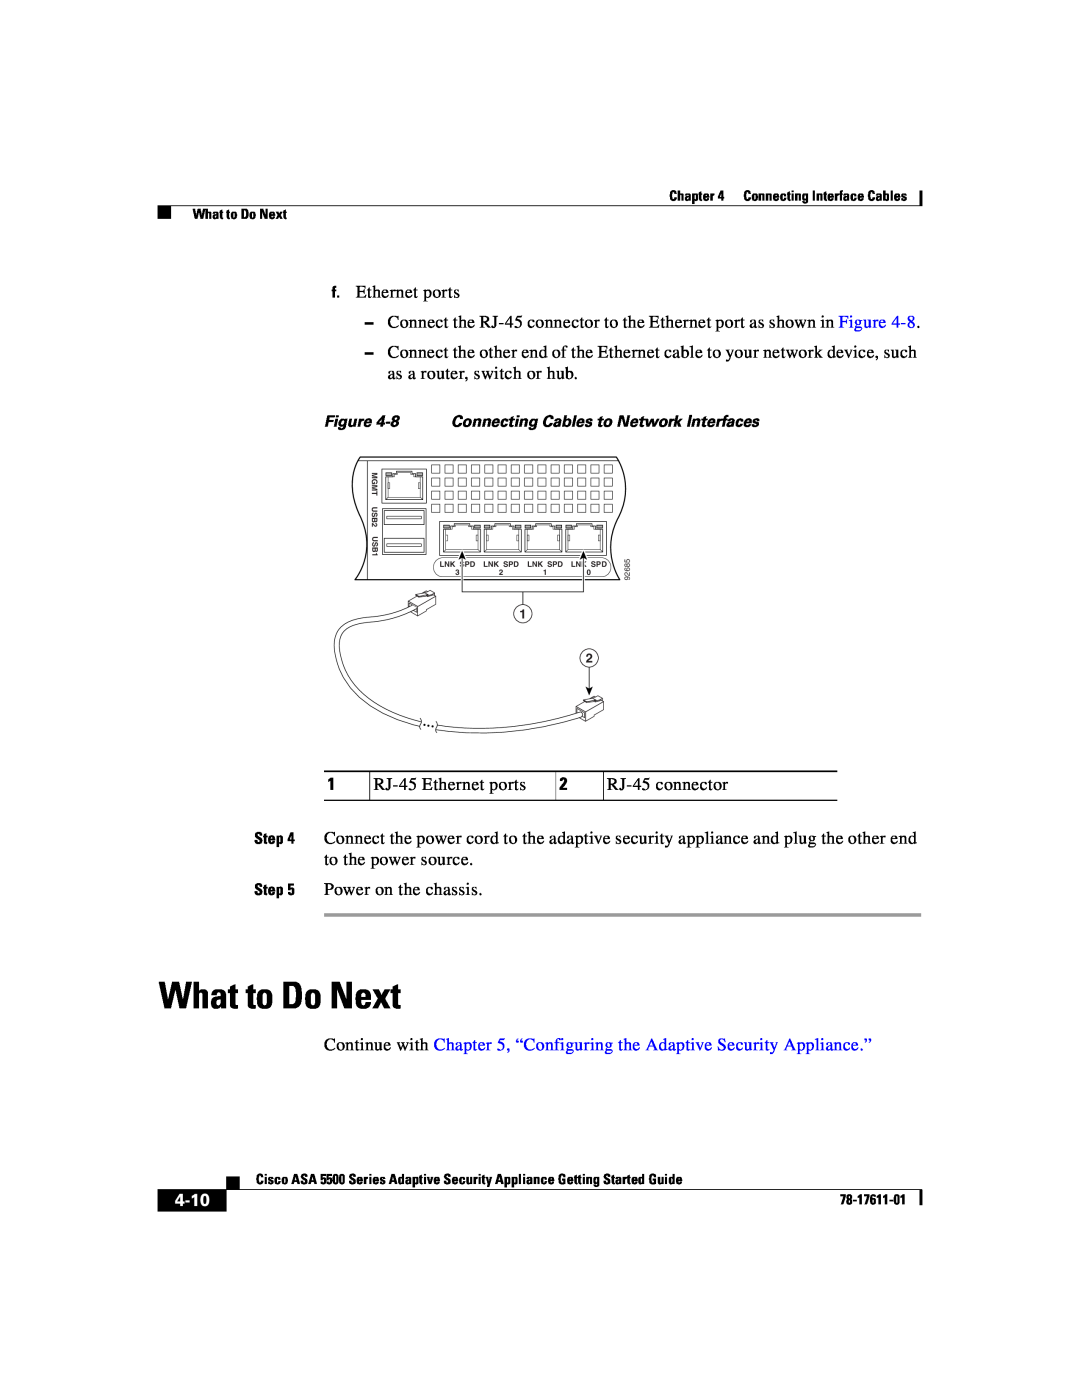 Cisco Systems ASA 5500 manual What to Do Next, f.Ethernet ports, 4-10 